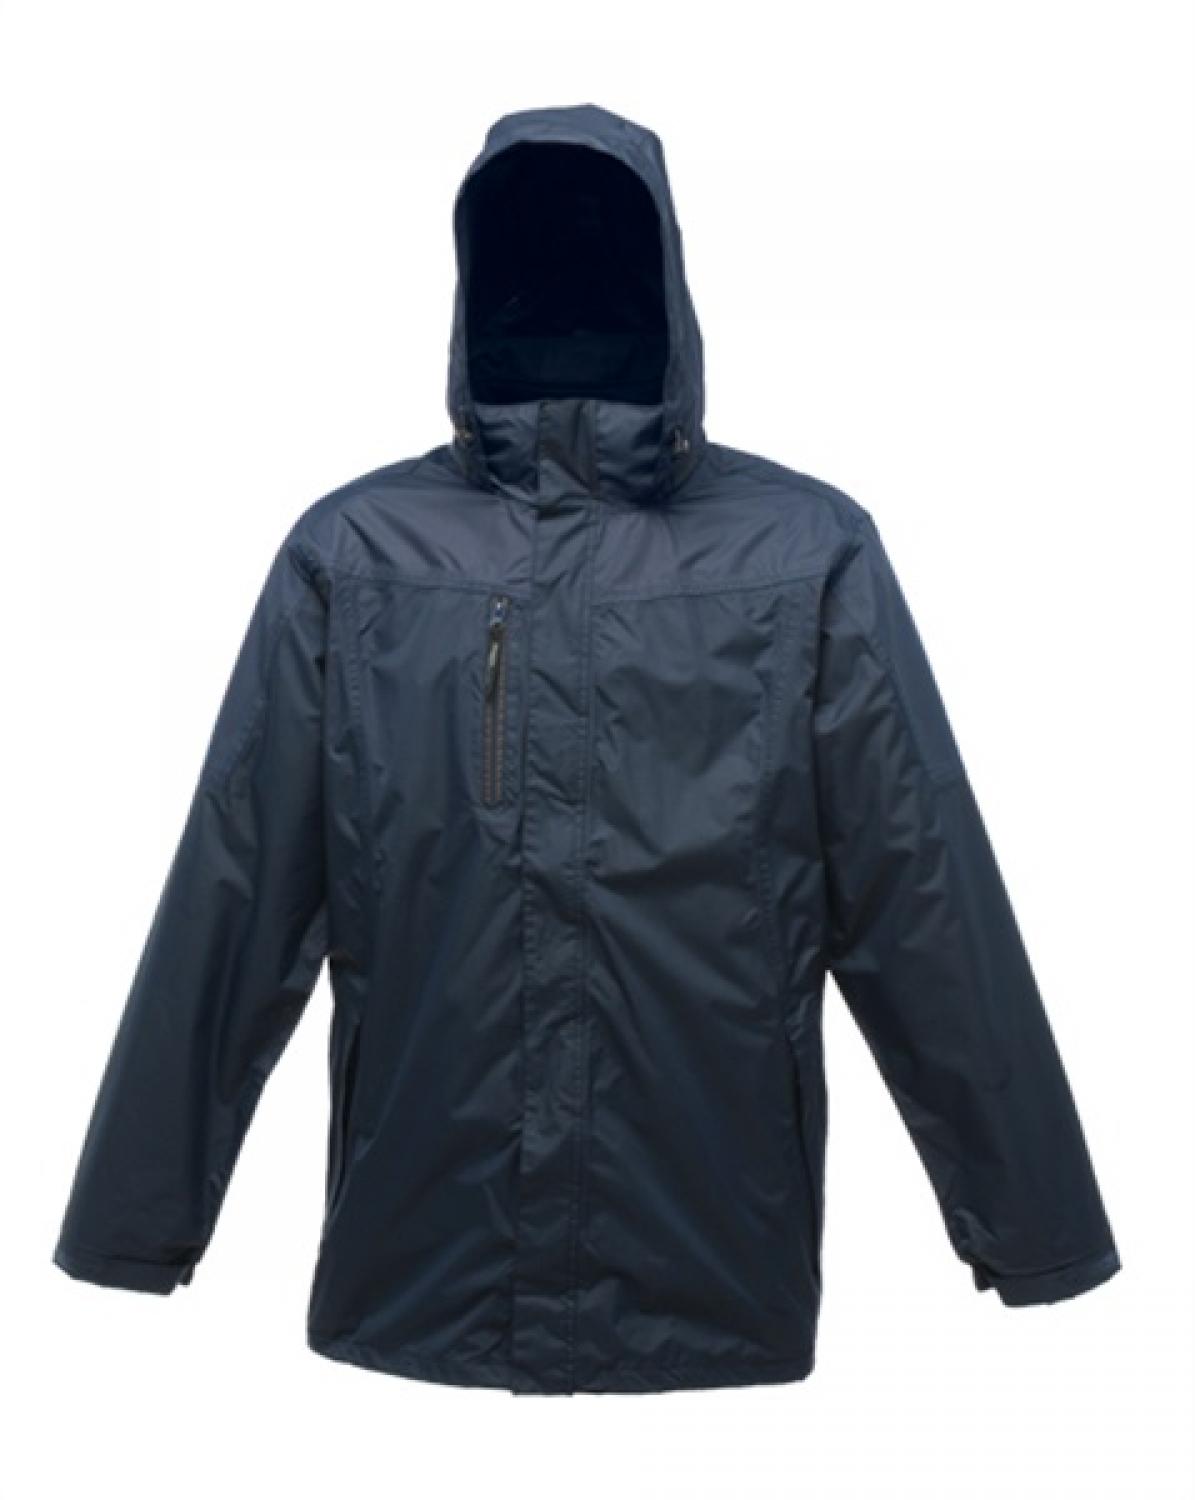 Buy Regatta Ledger 3 in 1 Jacket in Navy TRA138 from Fane Valley Stores ...